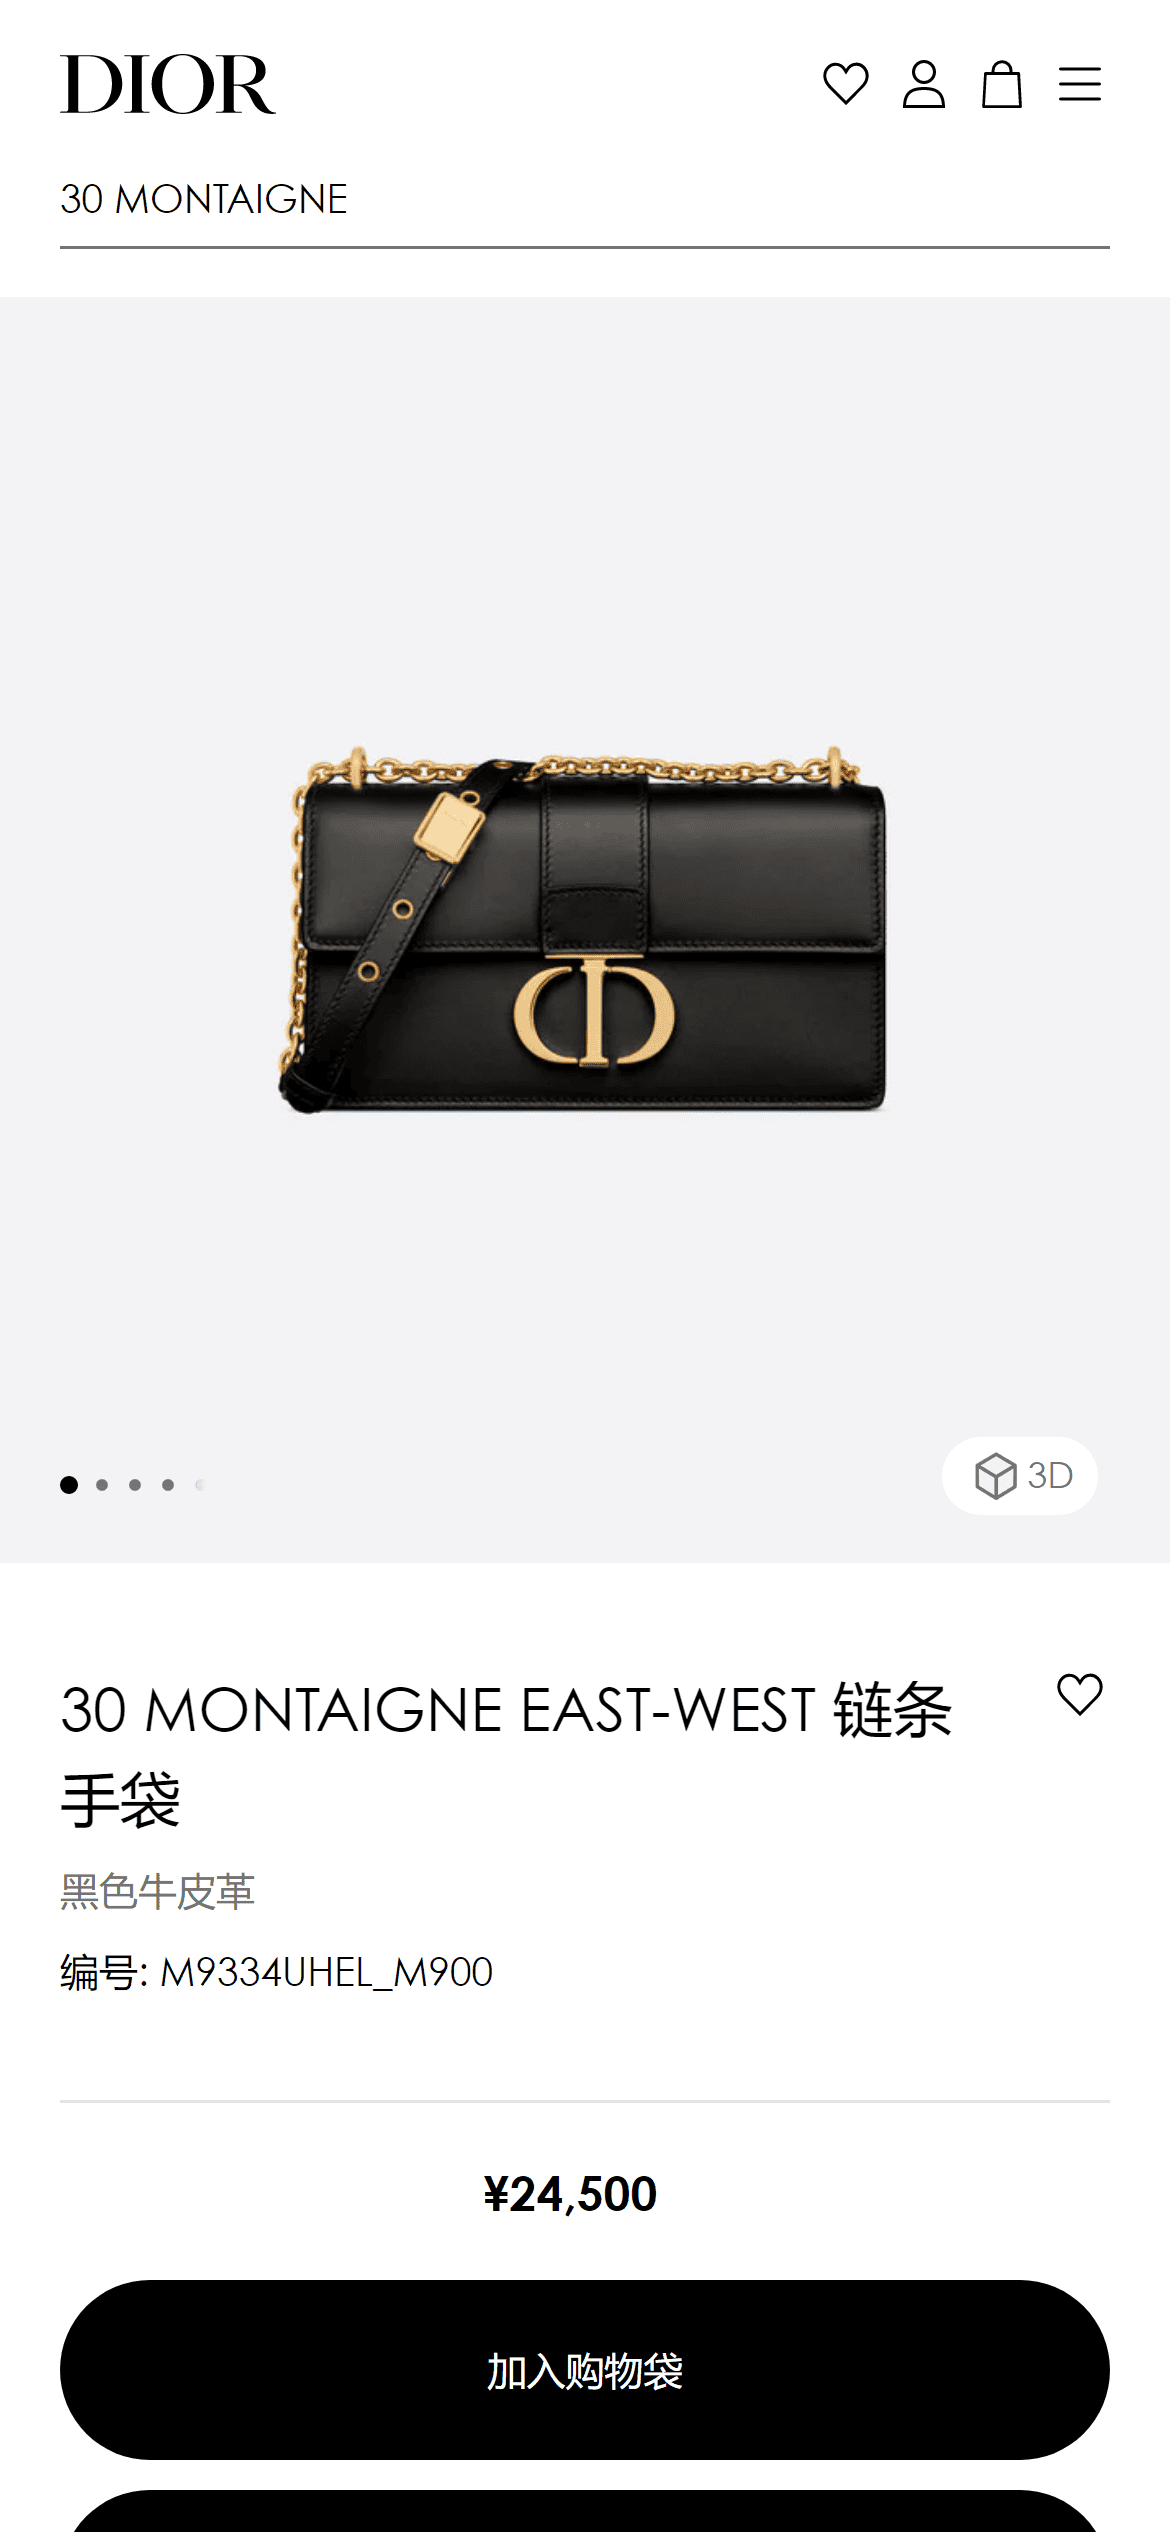 www.dior.cn_zh_cn_fashion_products_M9334UHEL_M900-30-montaigne-east-west-bag-with-chain-black-calfskin_objectIDM9334UHEL_M900query3020MONTAIGNEqueryID6a9ca300d6635e9e9895a51bafd18fd6iPhone-12-Pro.png